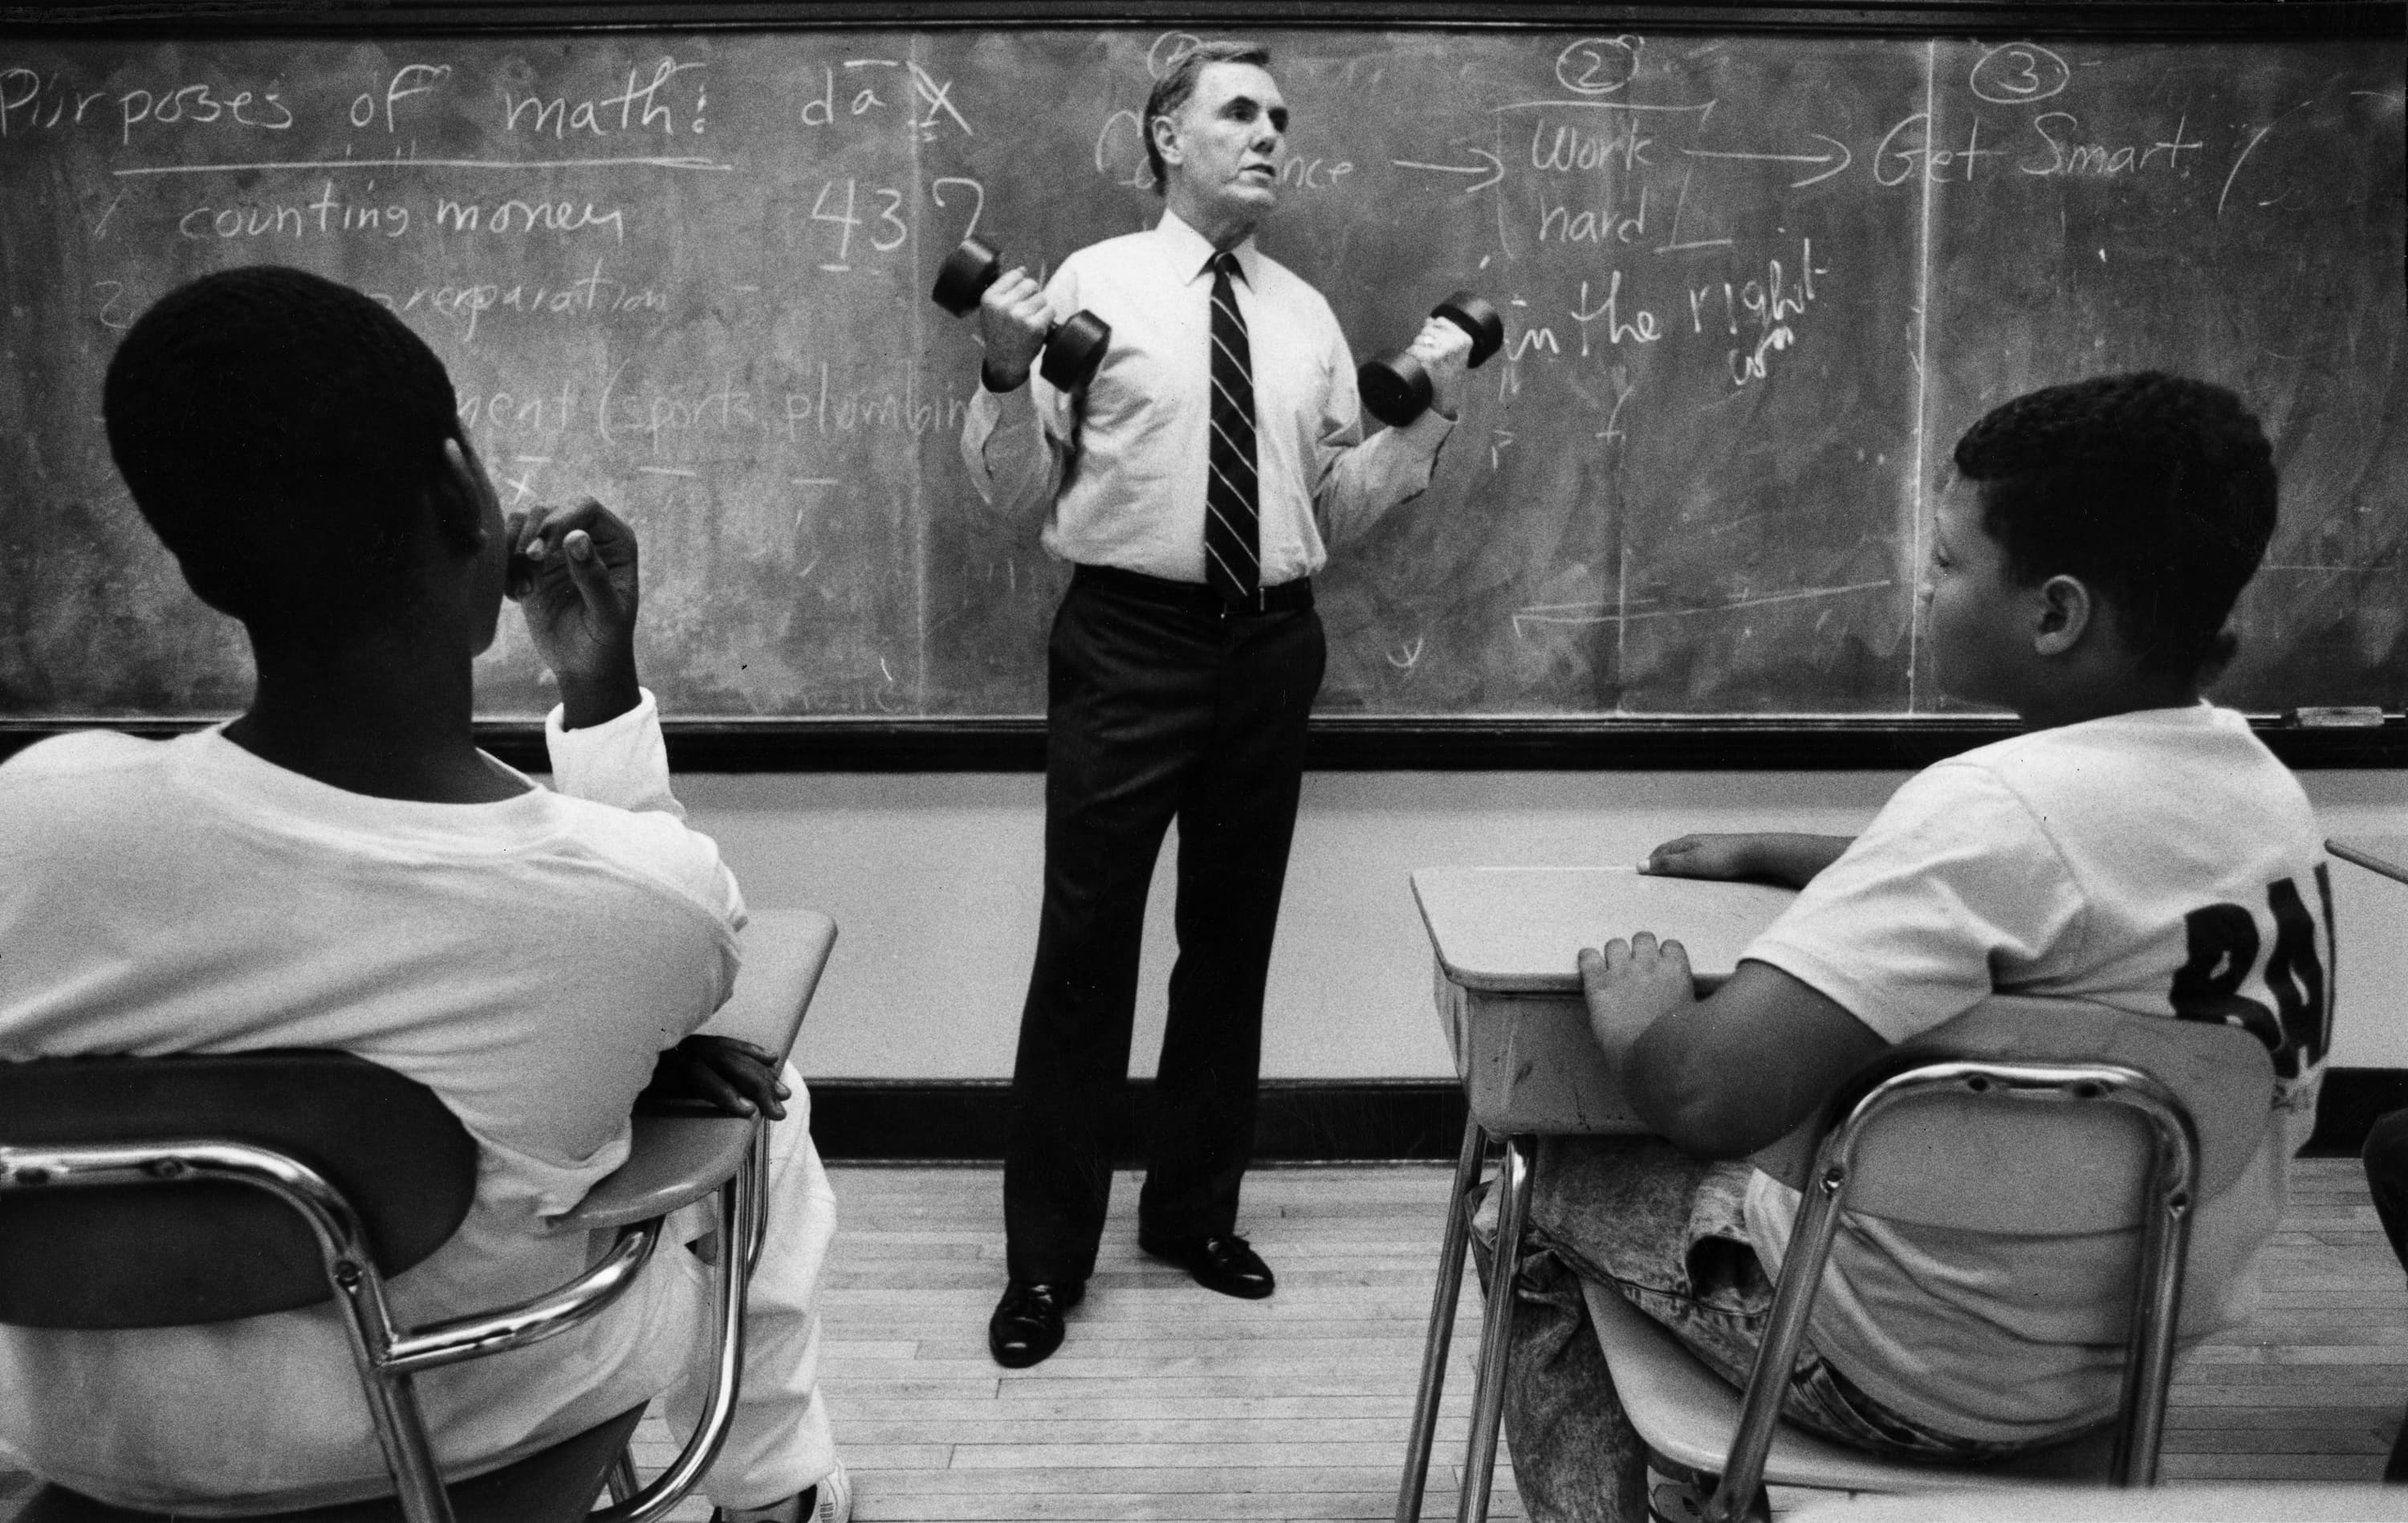 Boston Mayor Ray Flynn speaks to an 8th grade reading class at Thompson Middle School in Boston September 14, 1989. He visited the school to inspect renovations and urge students to avoid drugs.  (Photo by Bill Greene/The Boston Globe via Getty Images)